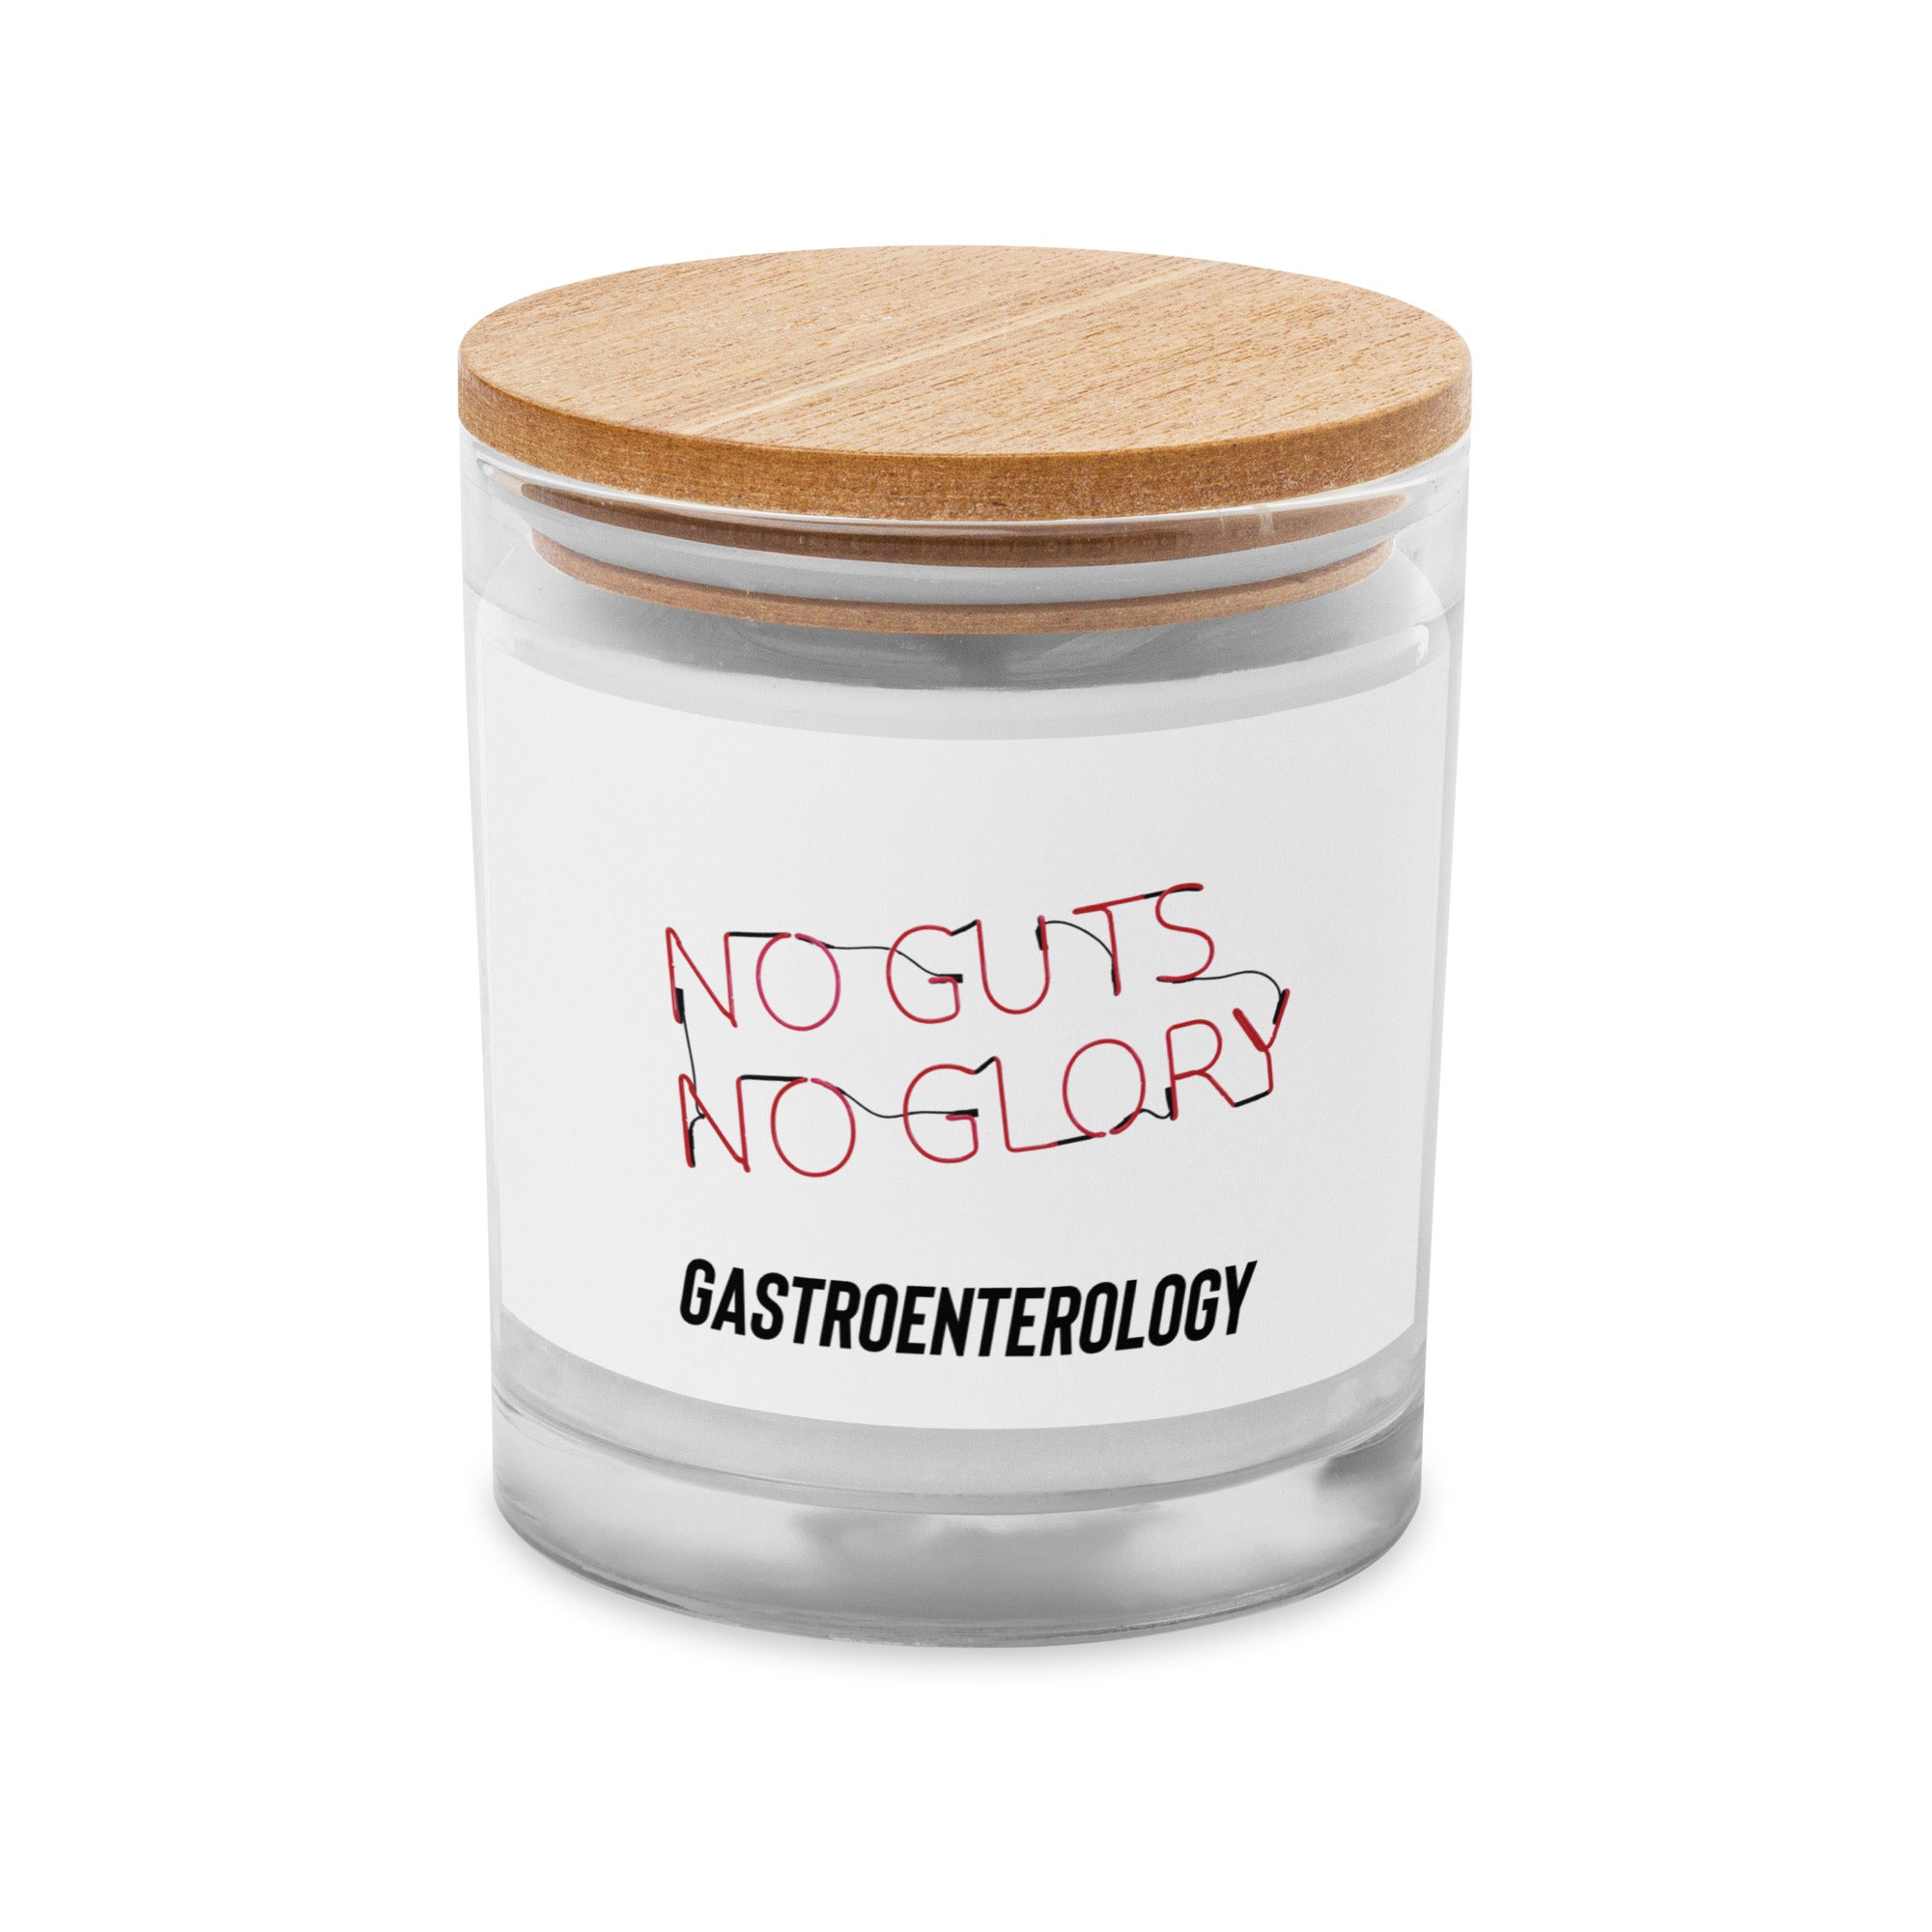 NO GUTS NOT GLORY Gastroenterology funny doctor gift Glass jar candle